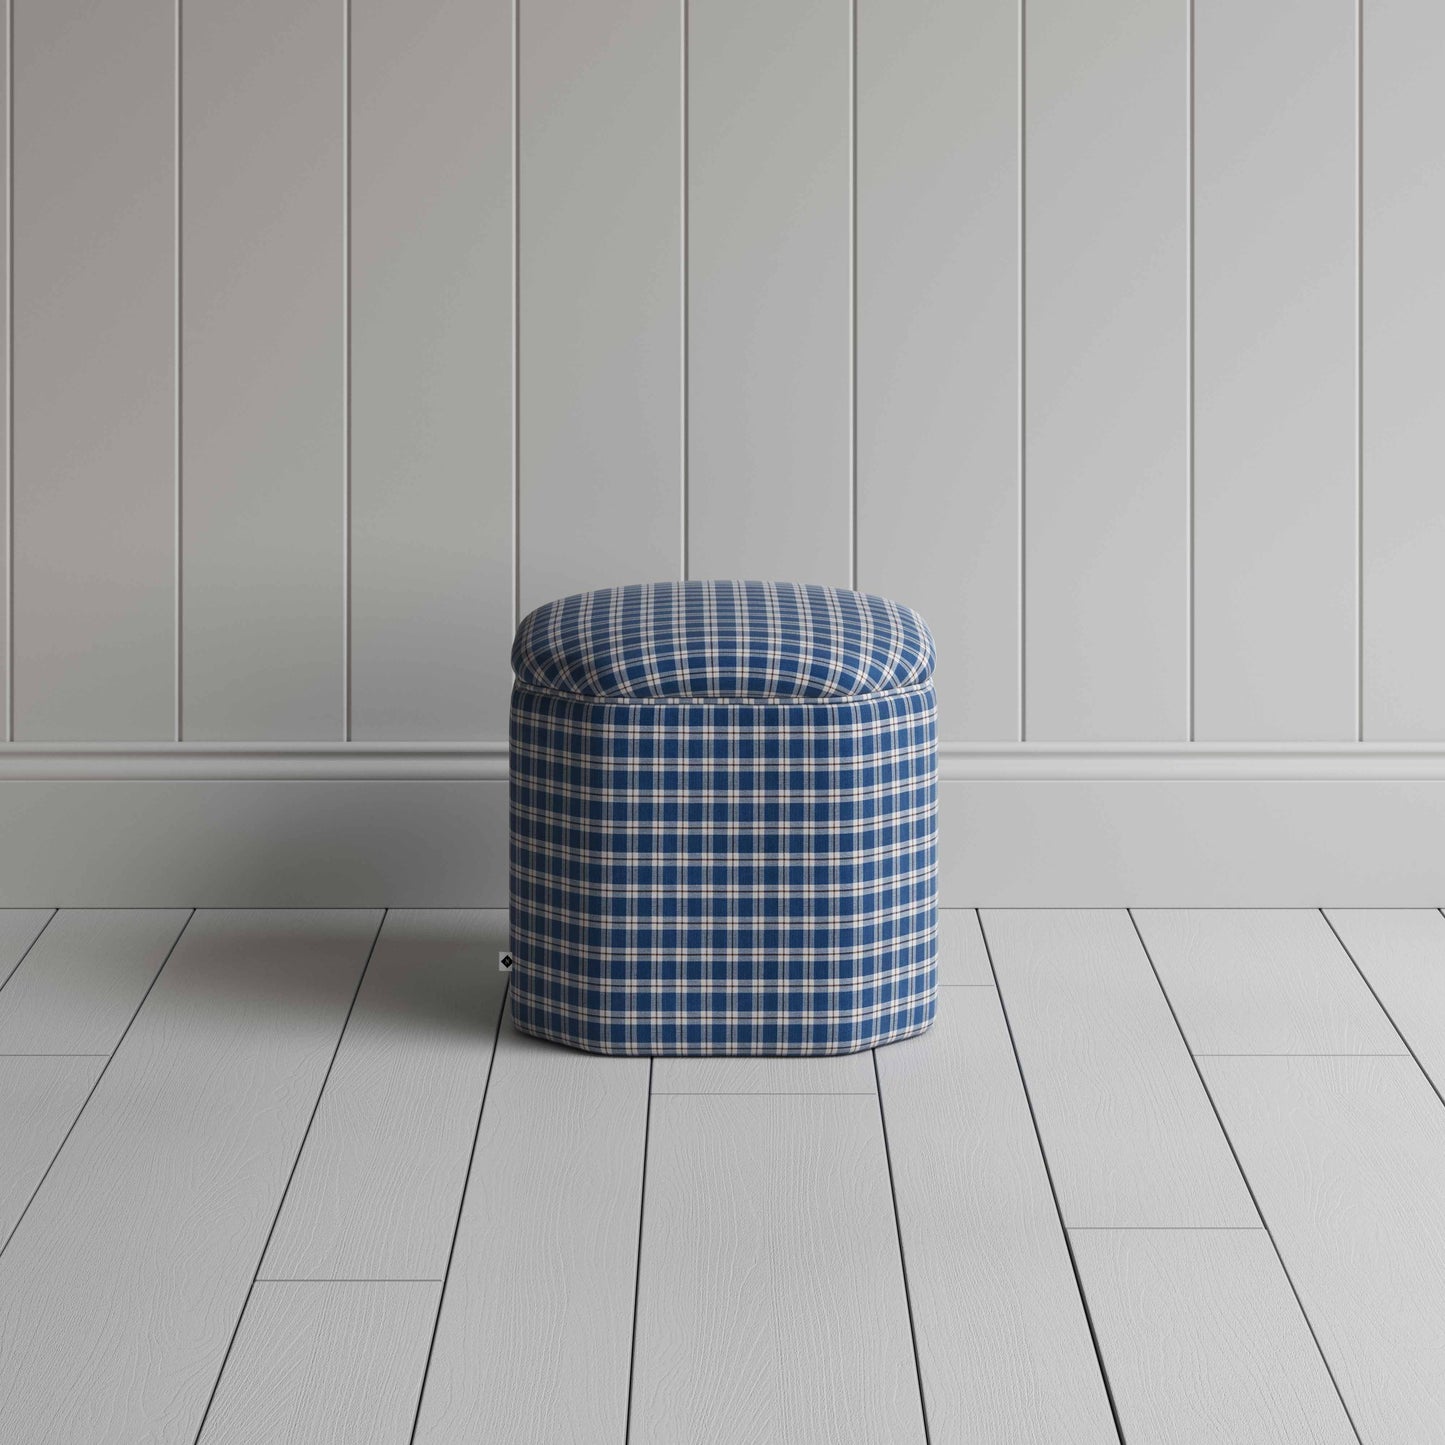 Thither Hexagonal Ottoman in Well Plaid Cotton, Blue Brown